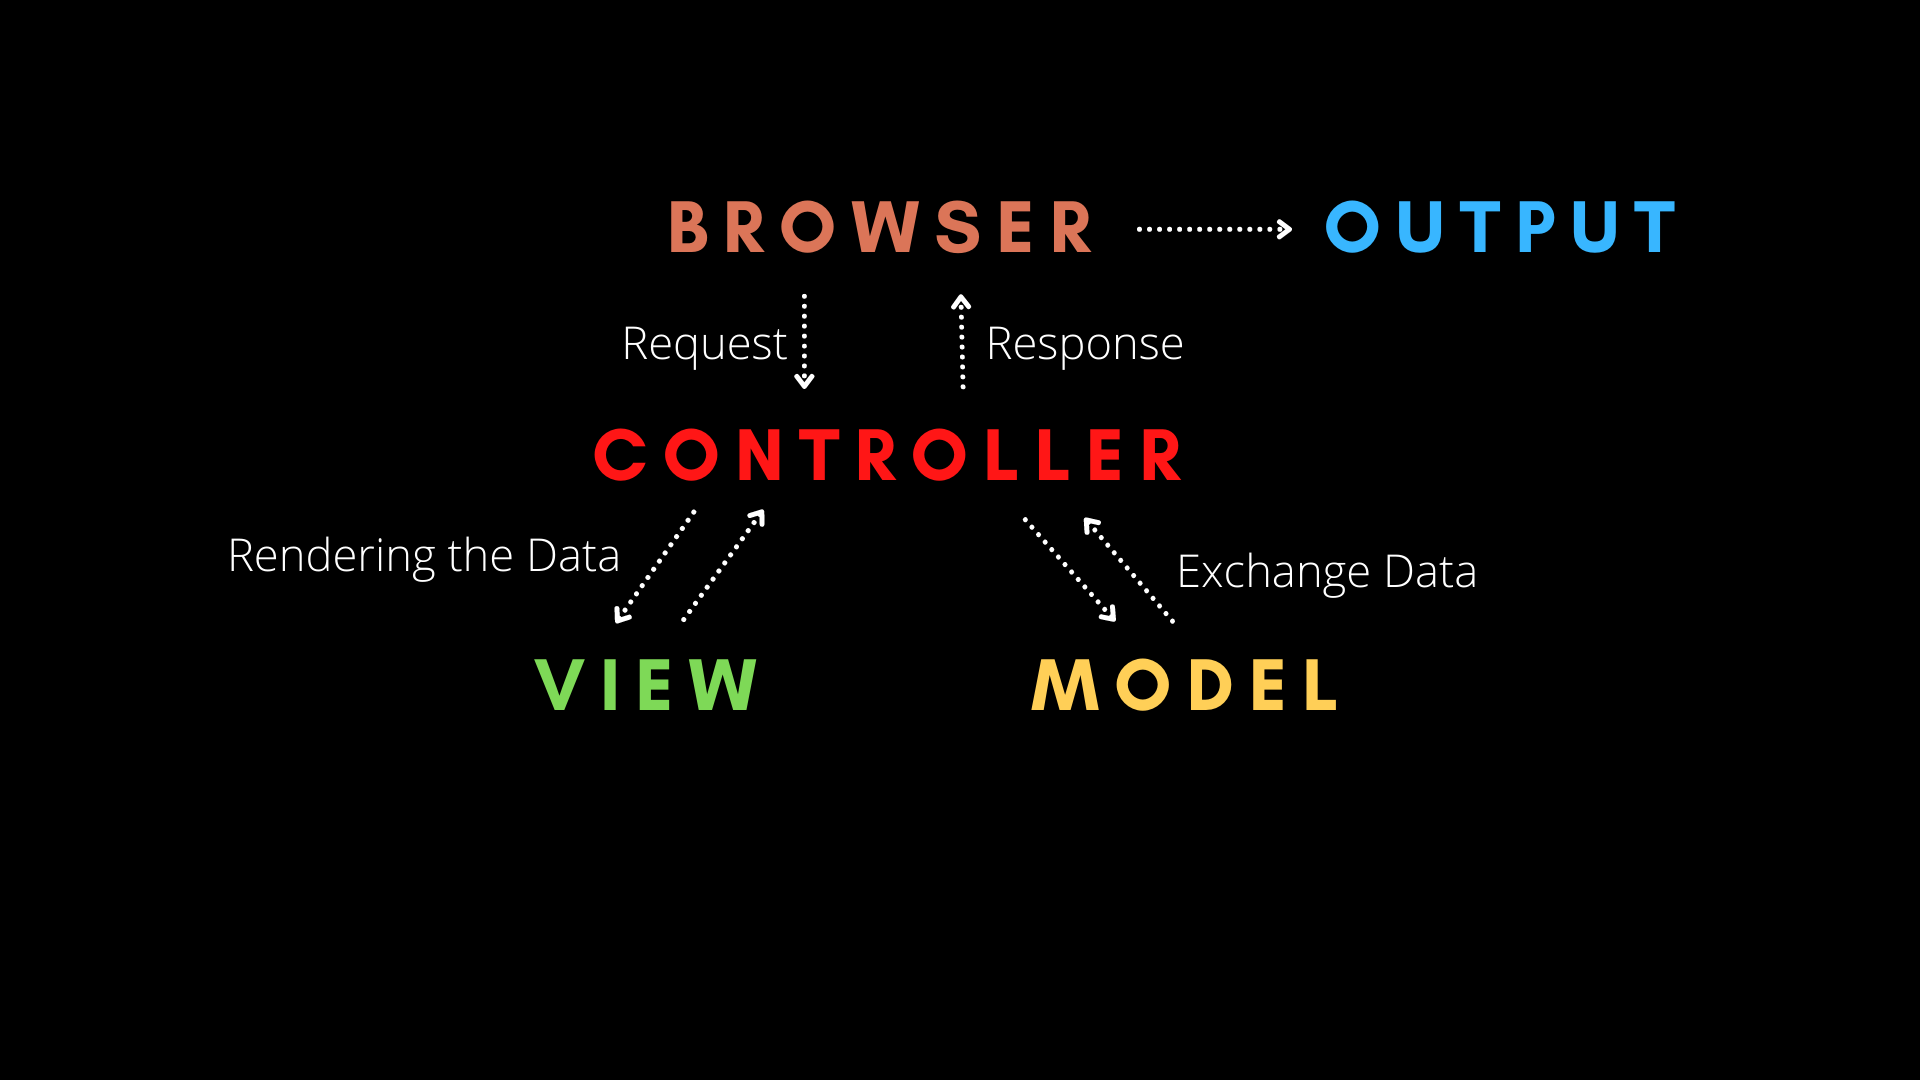 How Model-View-Controller Architecture Works